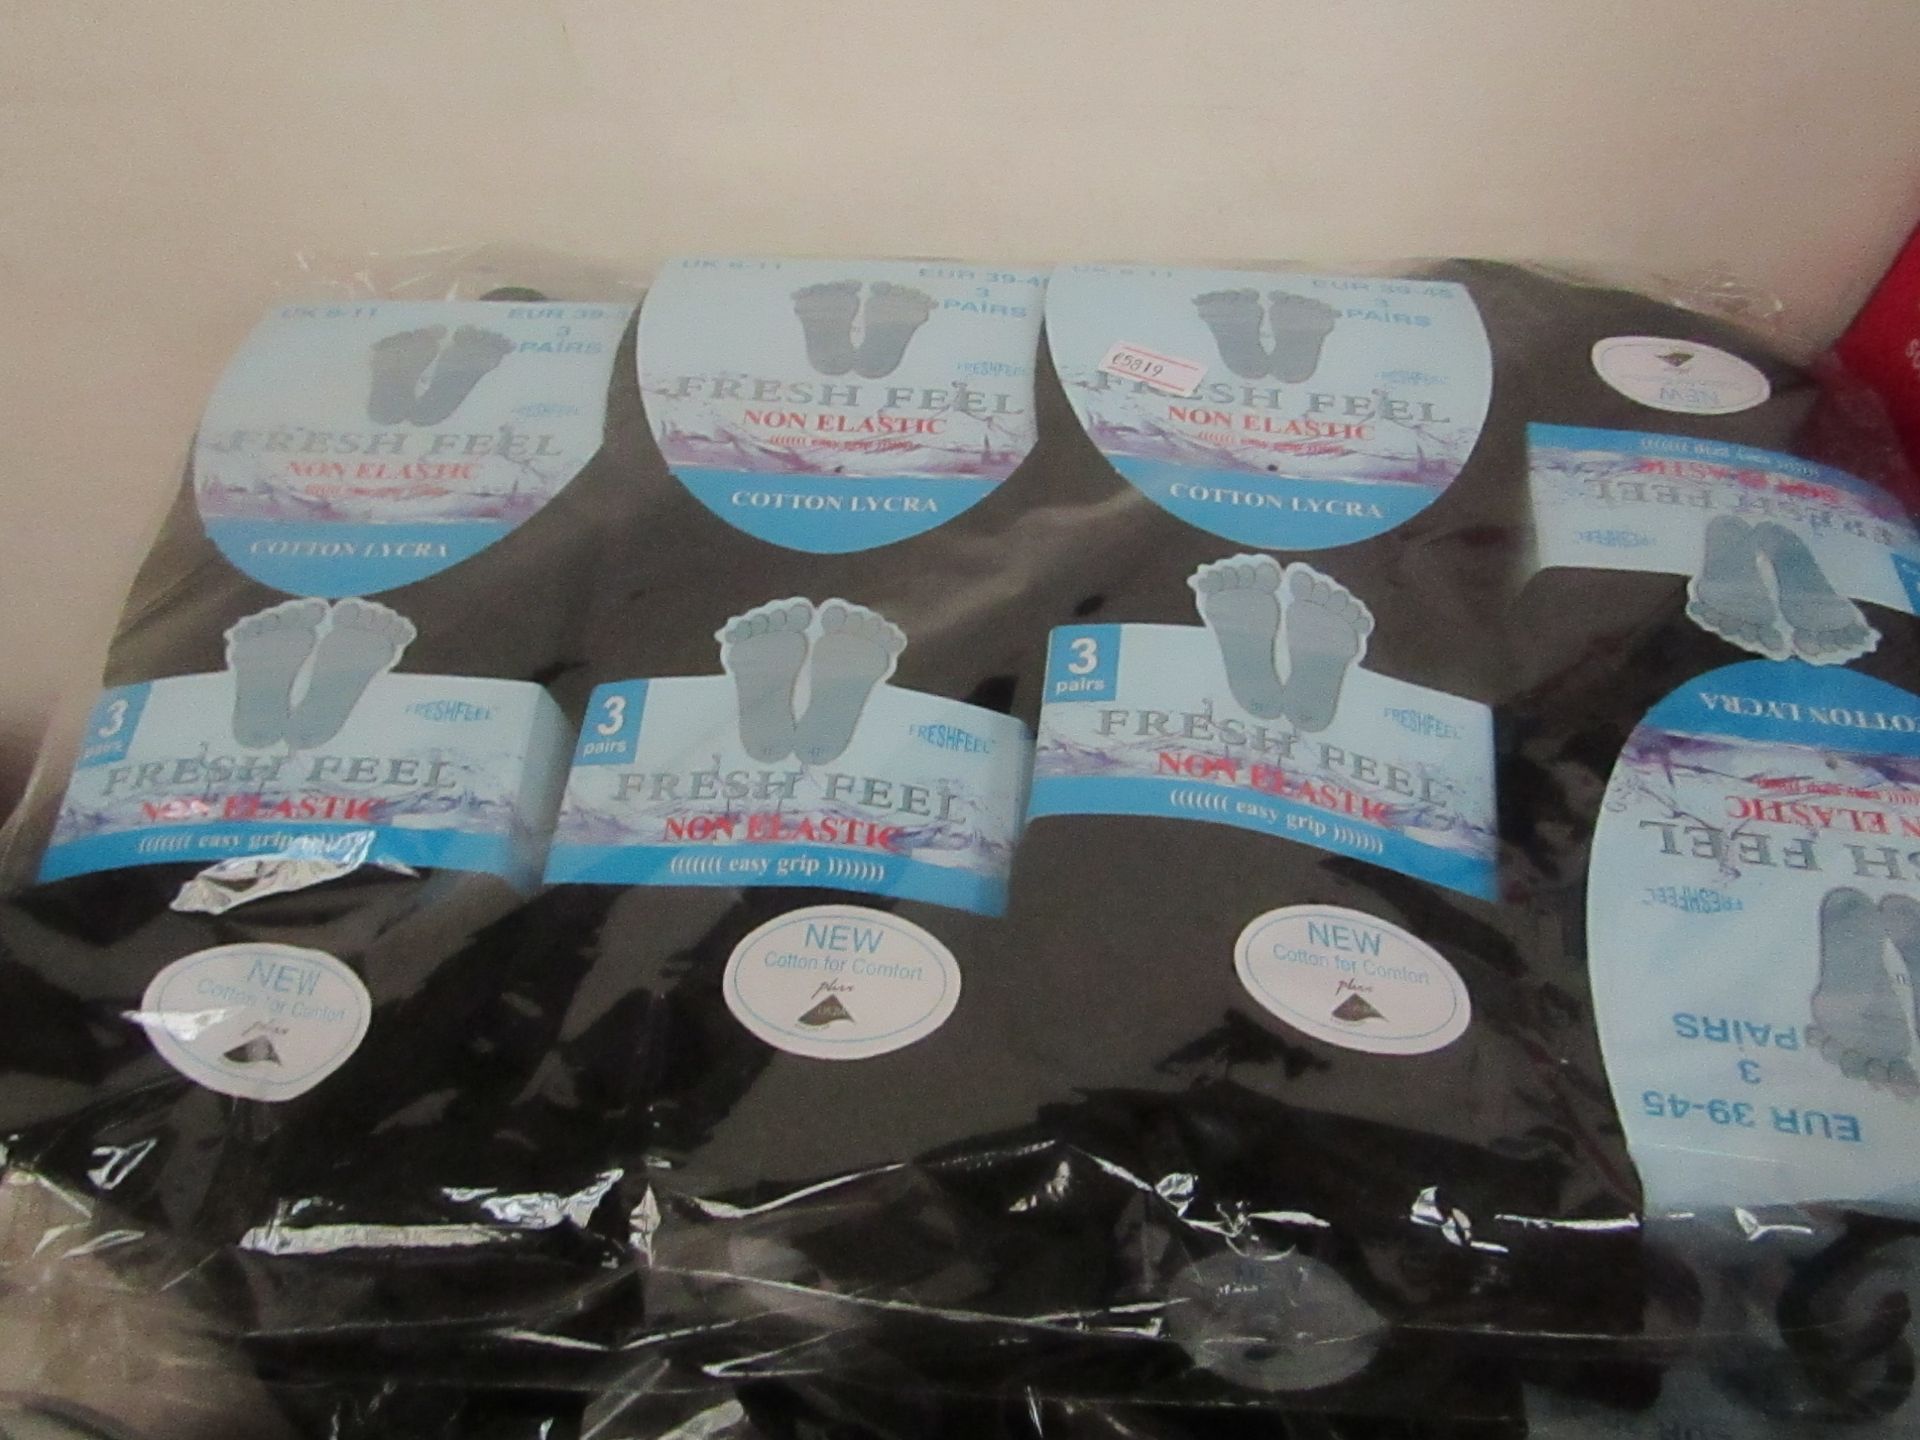 12x Pairs of Fresh Feel non-elastic socks, size Eur 39-45, new and packaged.